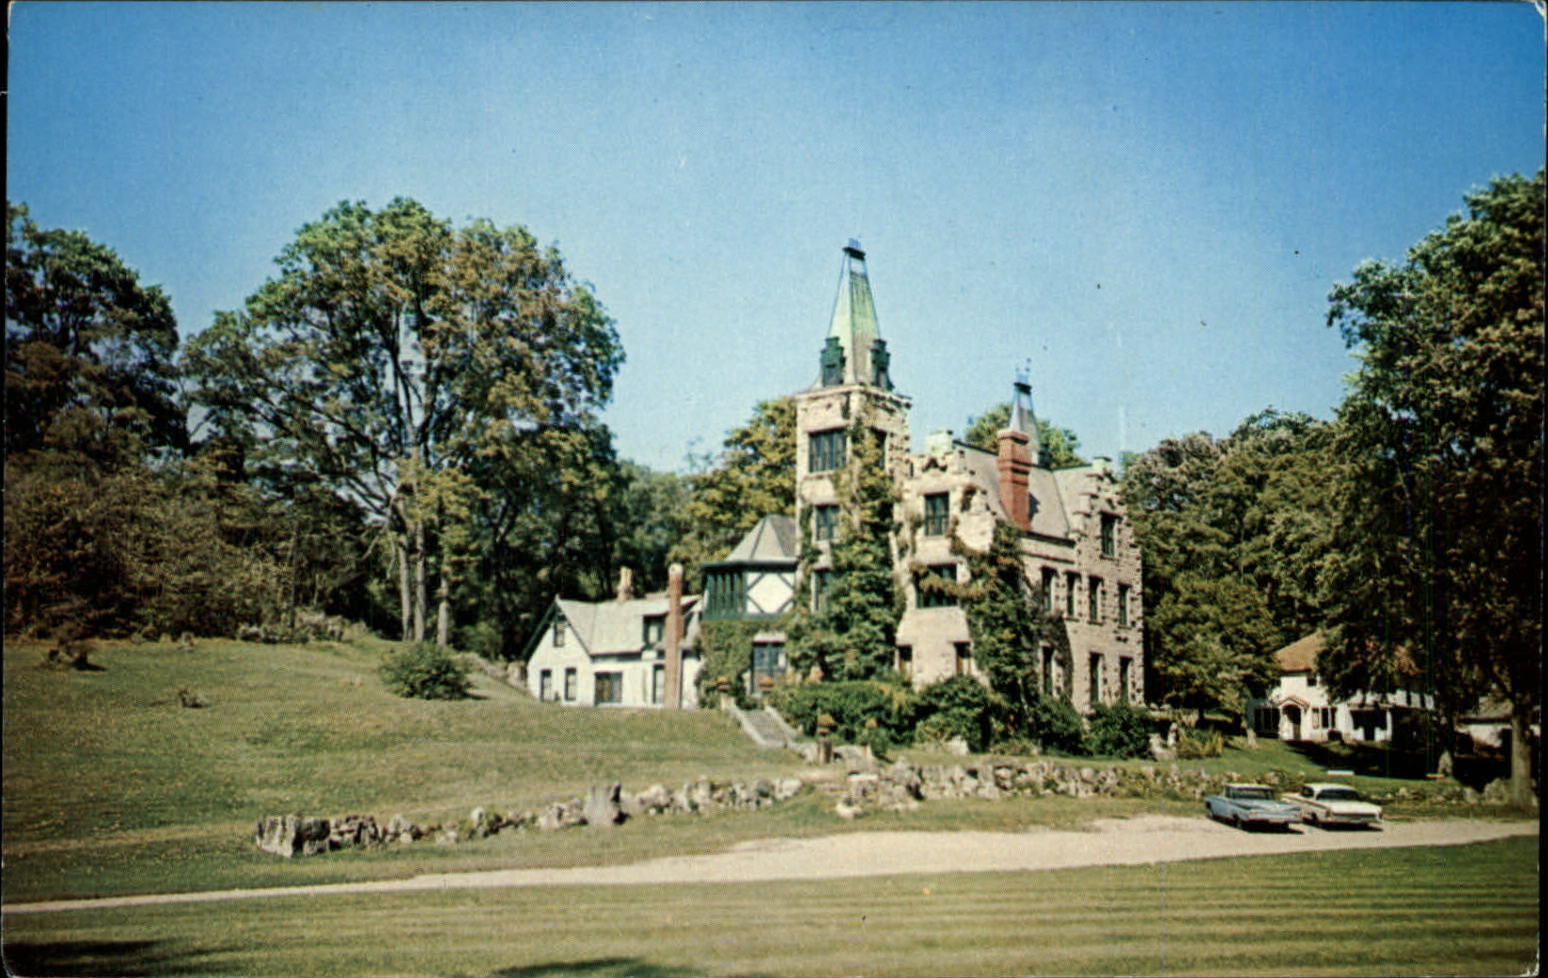 Mac-O-Chee Castle ~ West Liberty Ohio ~ Flemish style architecture ~ 1950s cars